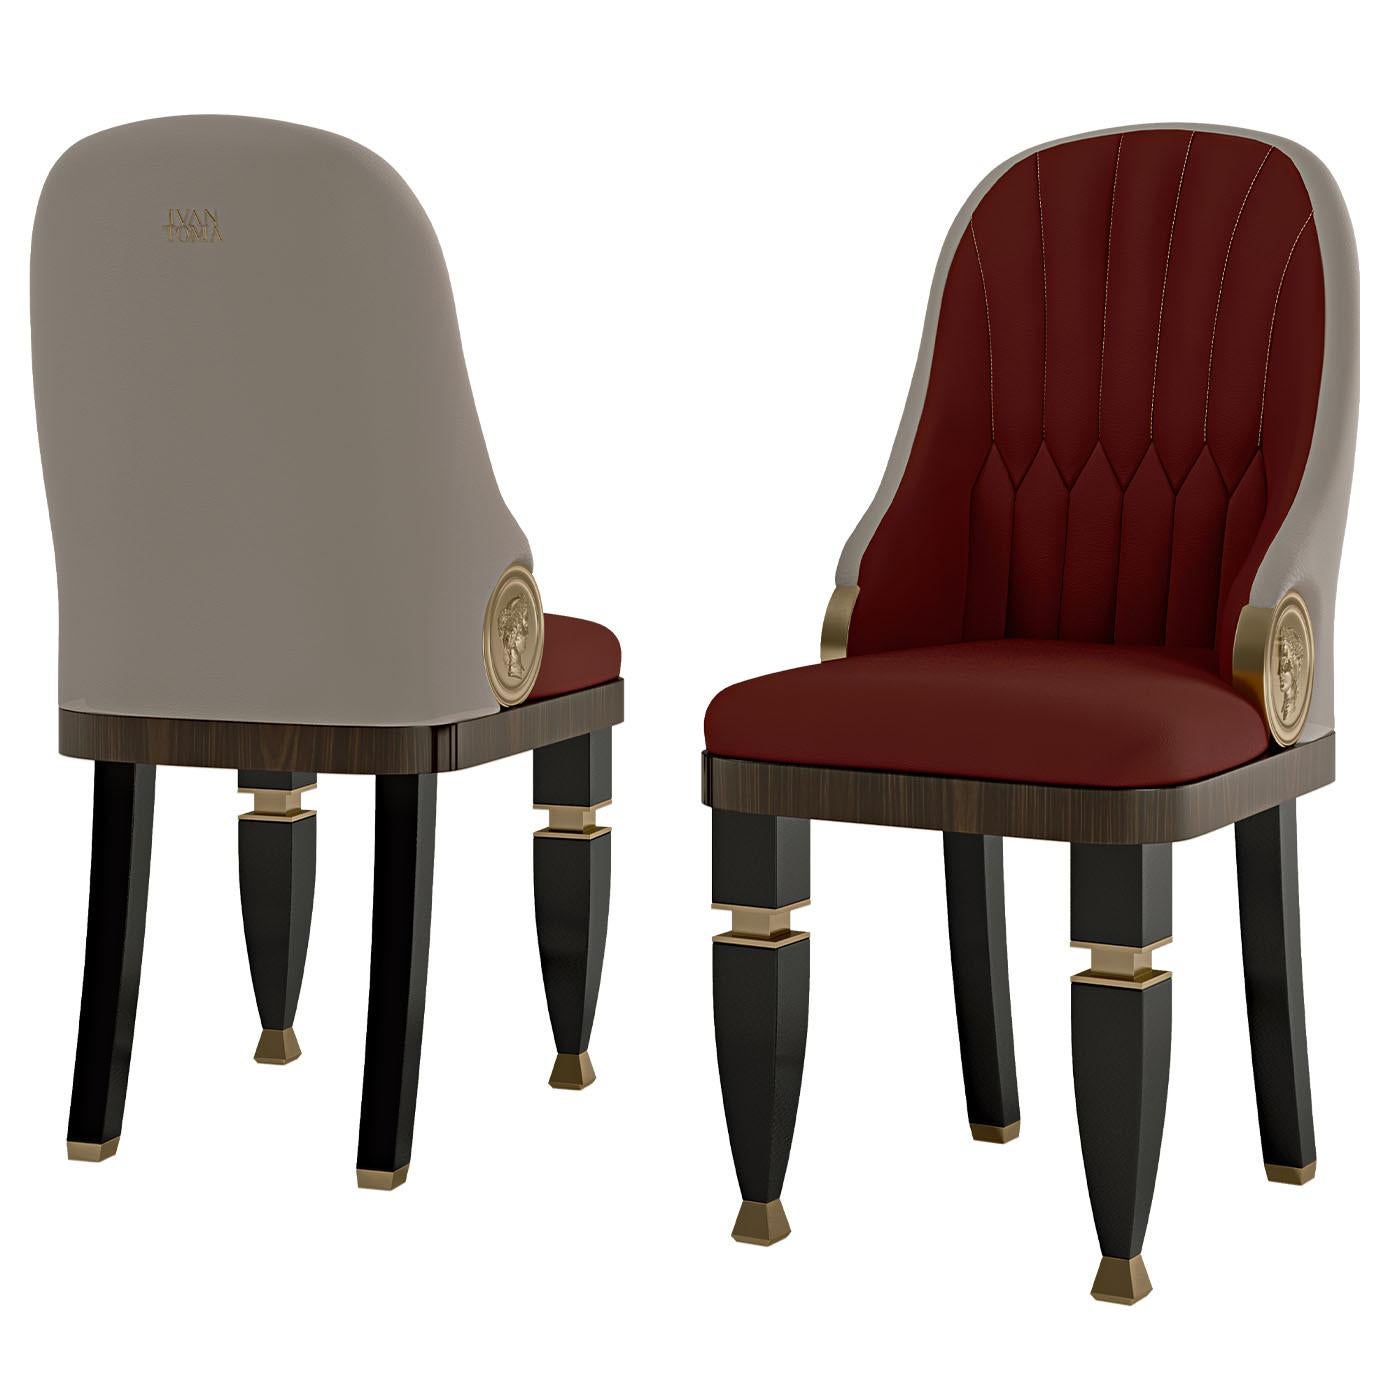 References to Renaissance, Baroque, and Egyptian styles define the lavish character of this elegant chair. The ash frame comprises white-lacquered legs supporting the seat base finished with a dark ebony finish. Featuring a slightly curved backrest